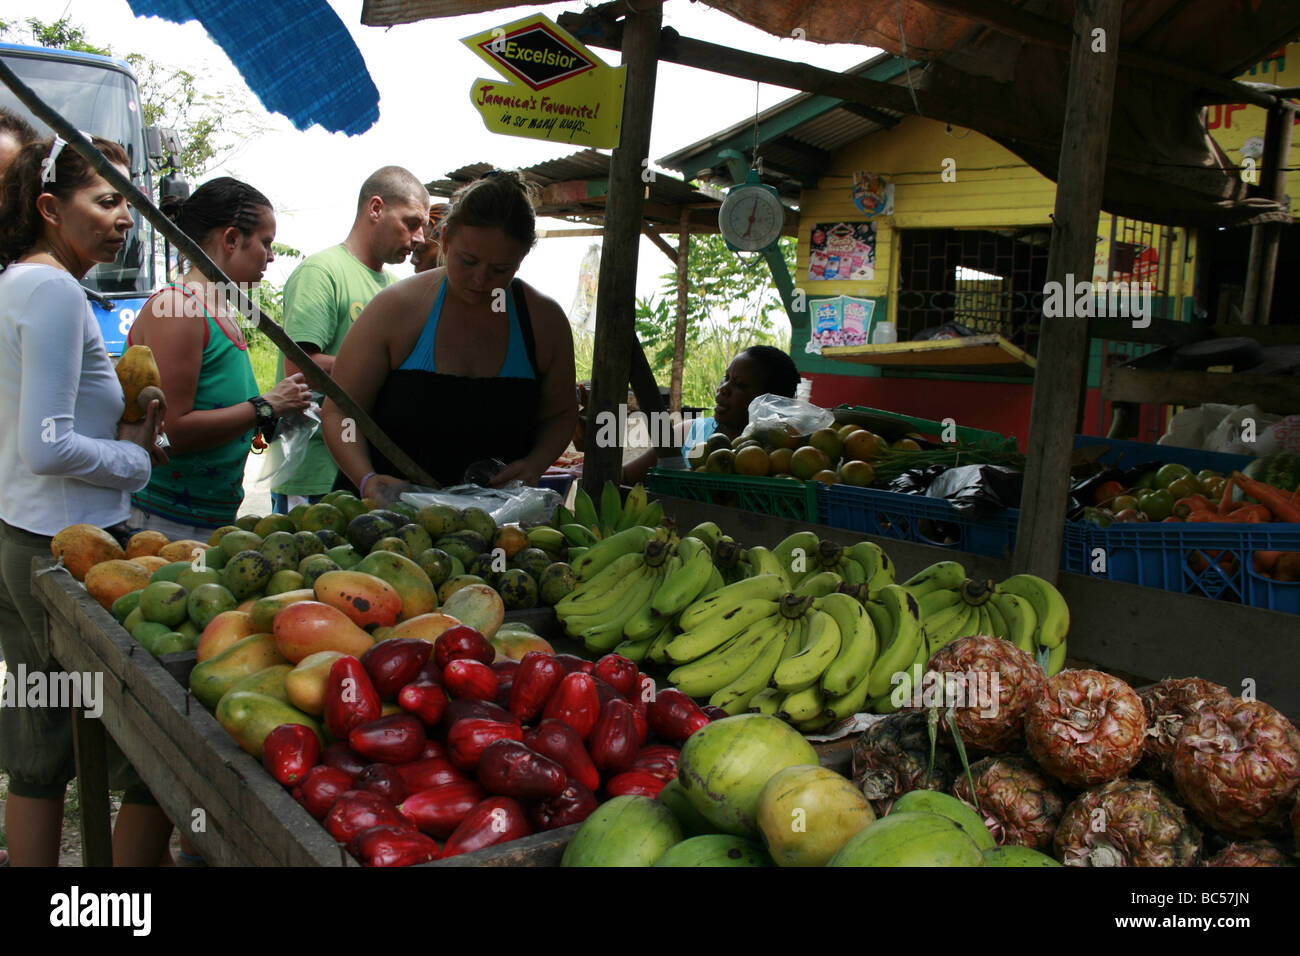 Tourists buying tropical fruits from a side road fruit stall in Middle Quarters, Jamaica Stock Photo